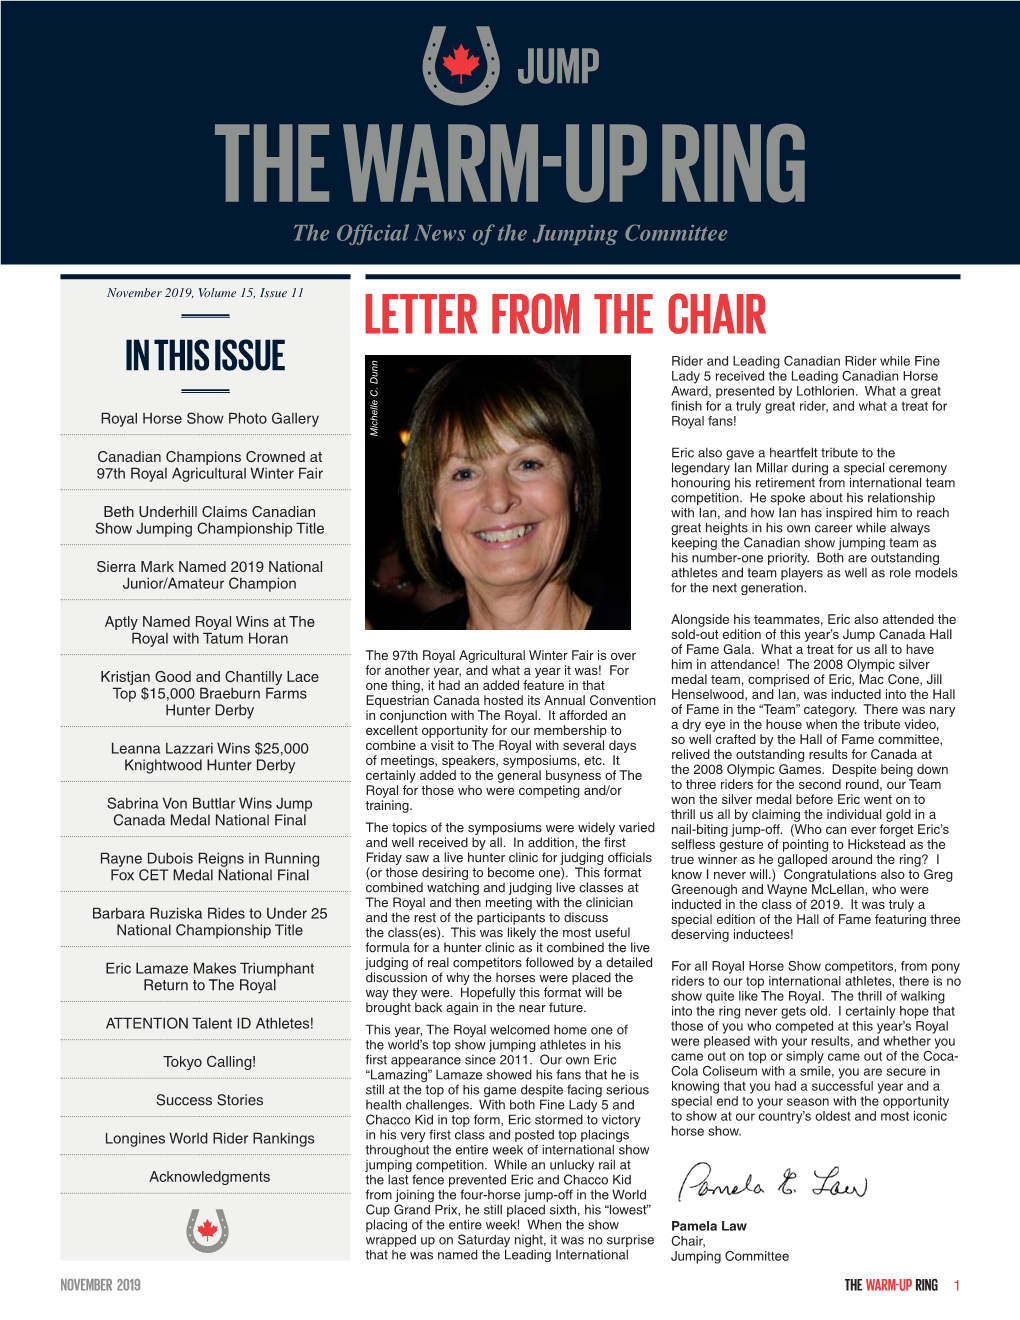 LETTER from the CHAIR in THIS ISSUE Rider and Leading Canadian Rider While Fine Lady 5 Received the Leading Canadian Horse Award, Presented by Lothlorien